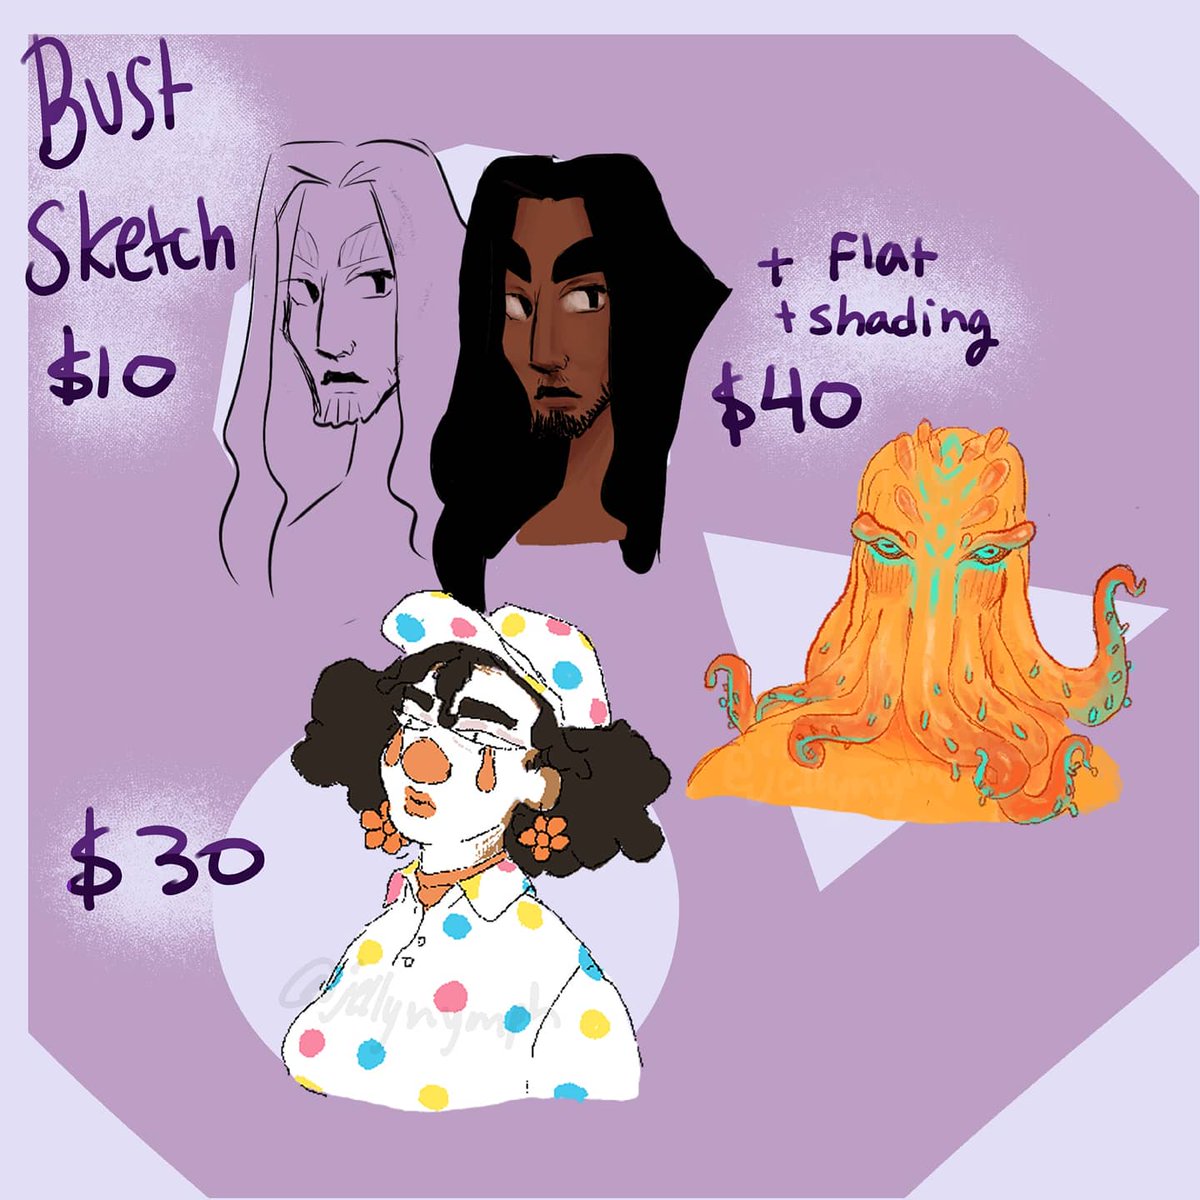 COMMS OPEN!! pls rt! i need funds to pay for school stuff! 1/2 